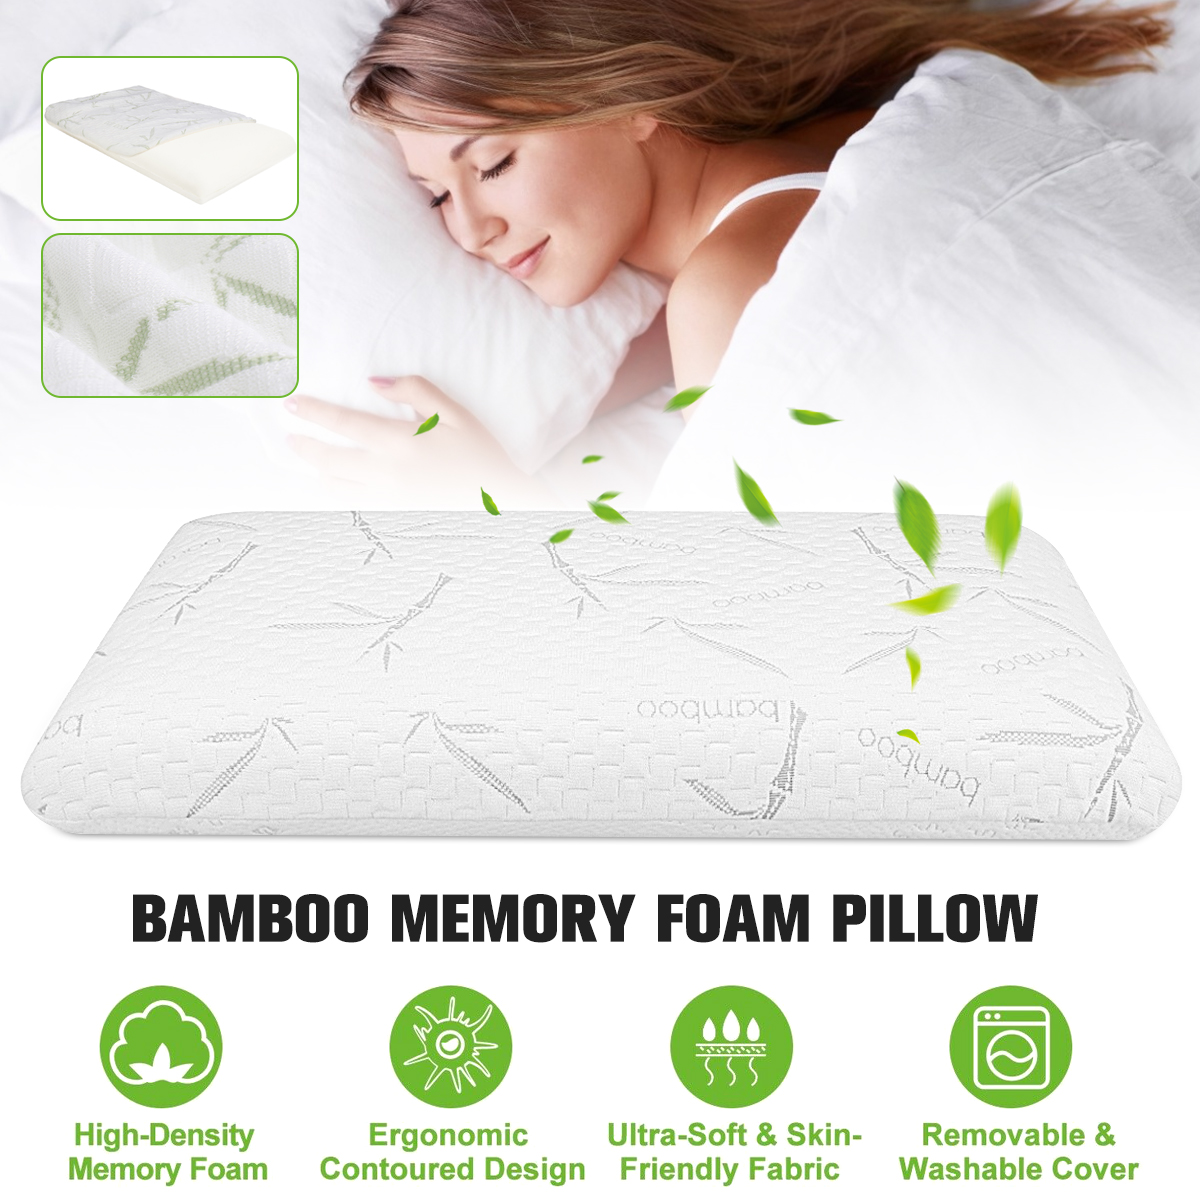 Bamboo-Memory-Foam-Pillow-Reversible-Pillow-Orthopedic-Slow-Rebound-Cervical-Neck-Pain-Relief-1813962-2